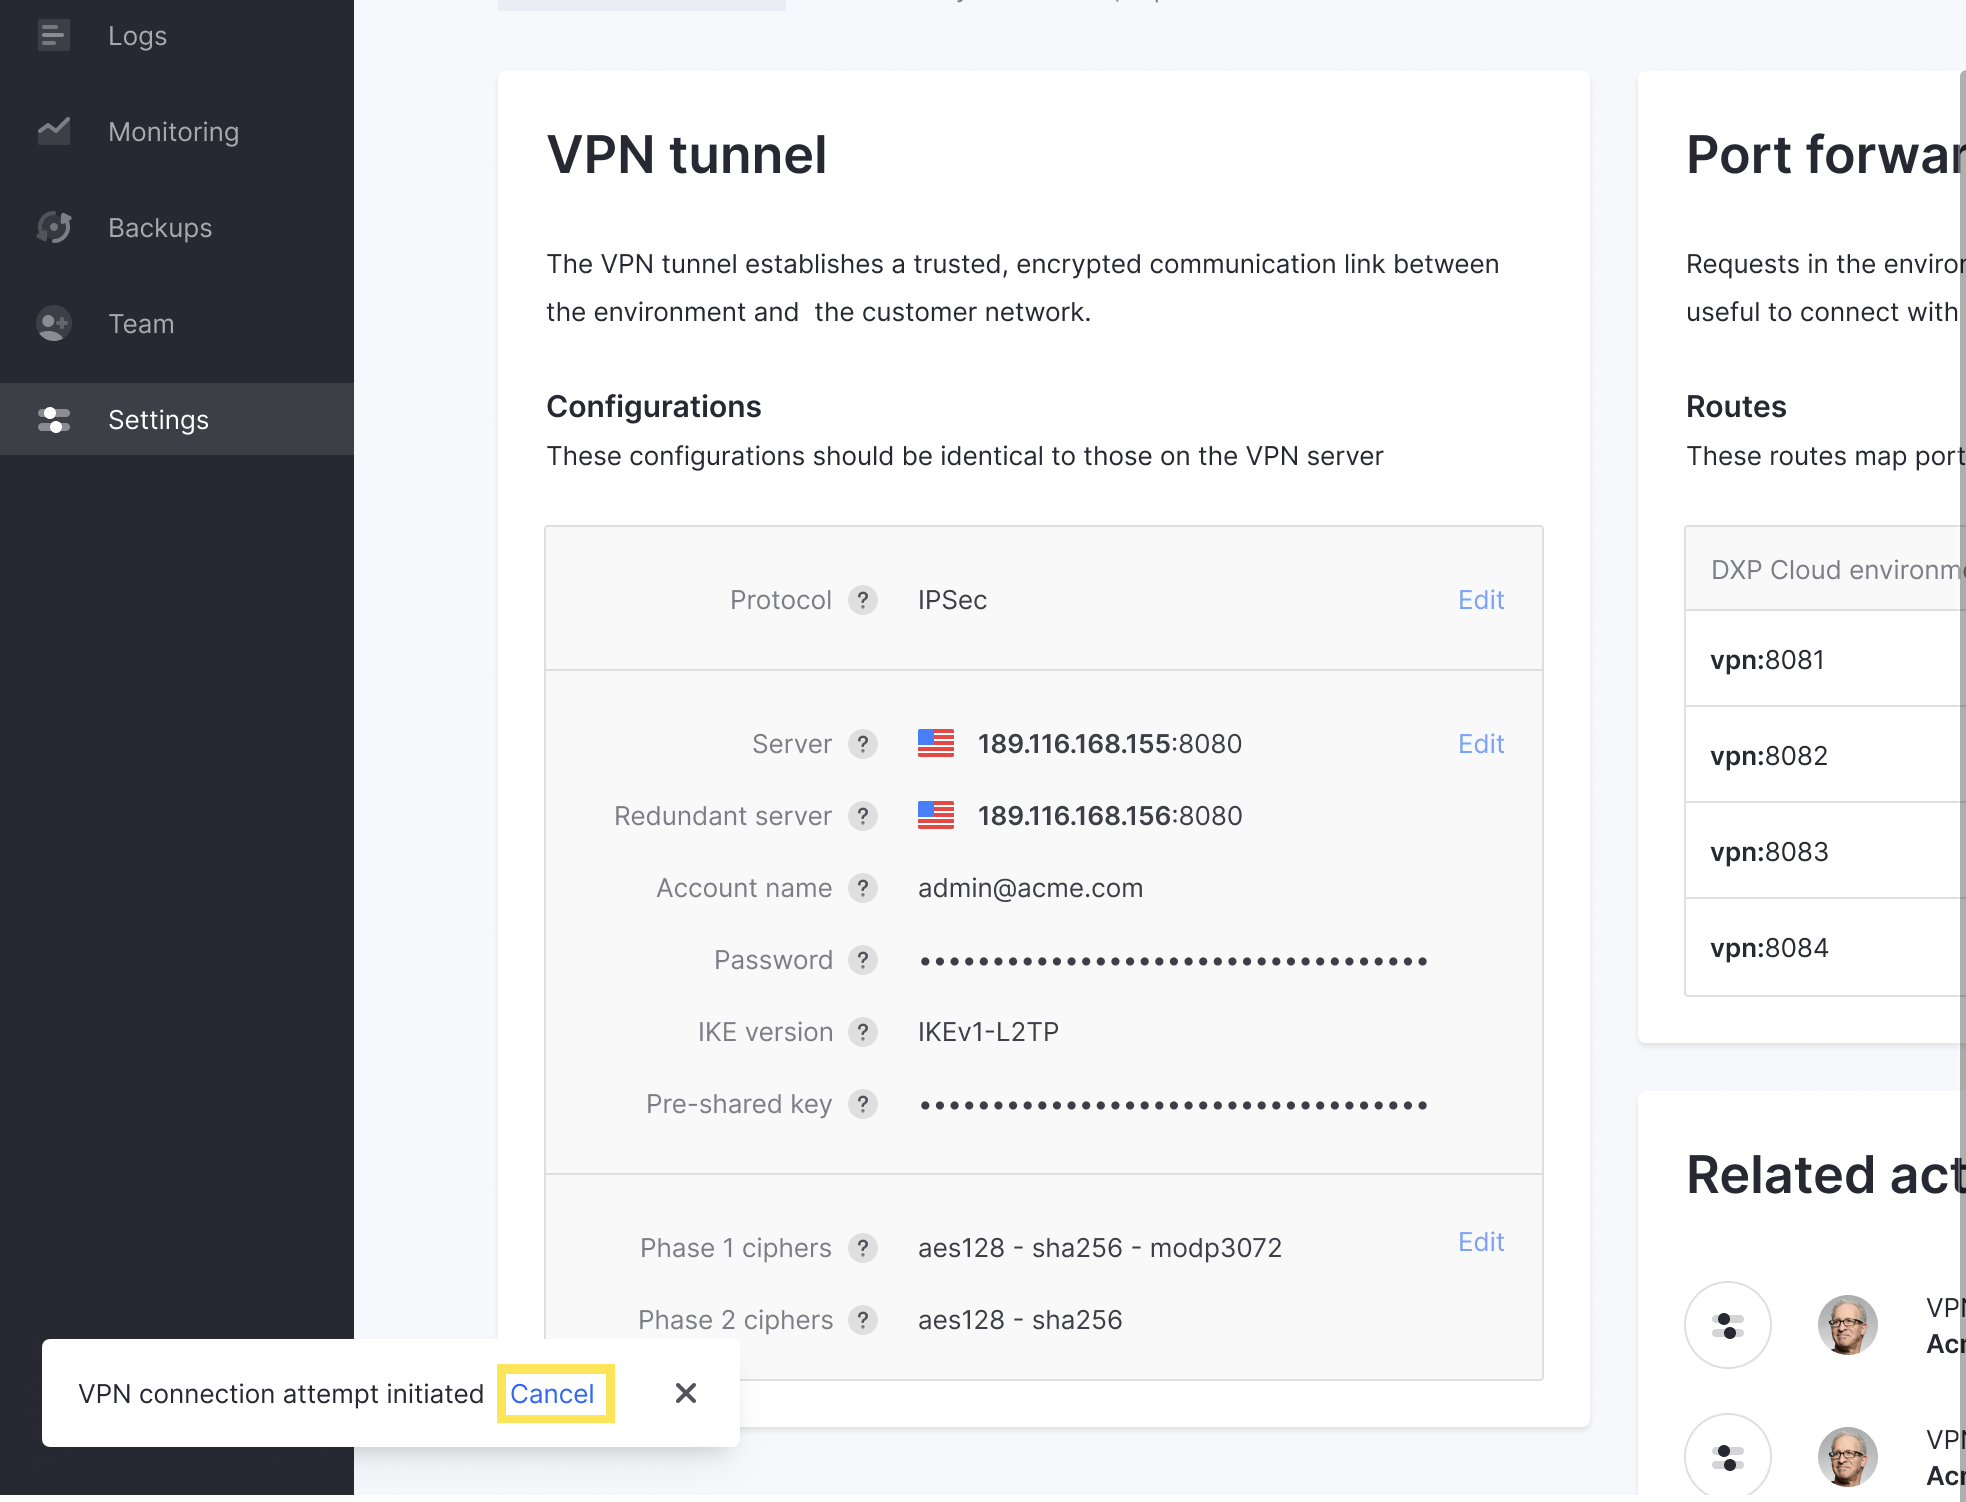 The Disconnect VPN page asks you to confirm the impact of disconnecting before proceeding.